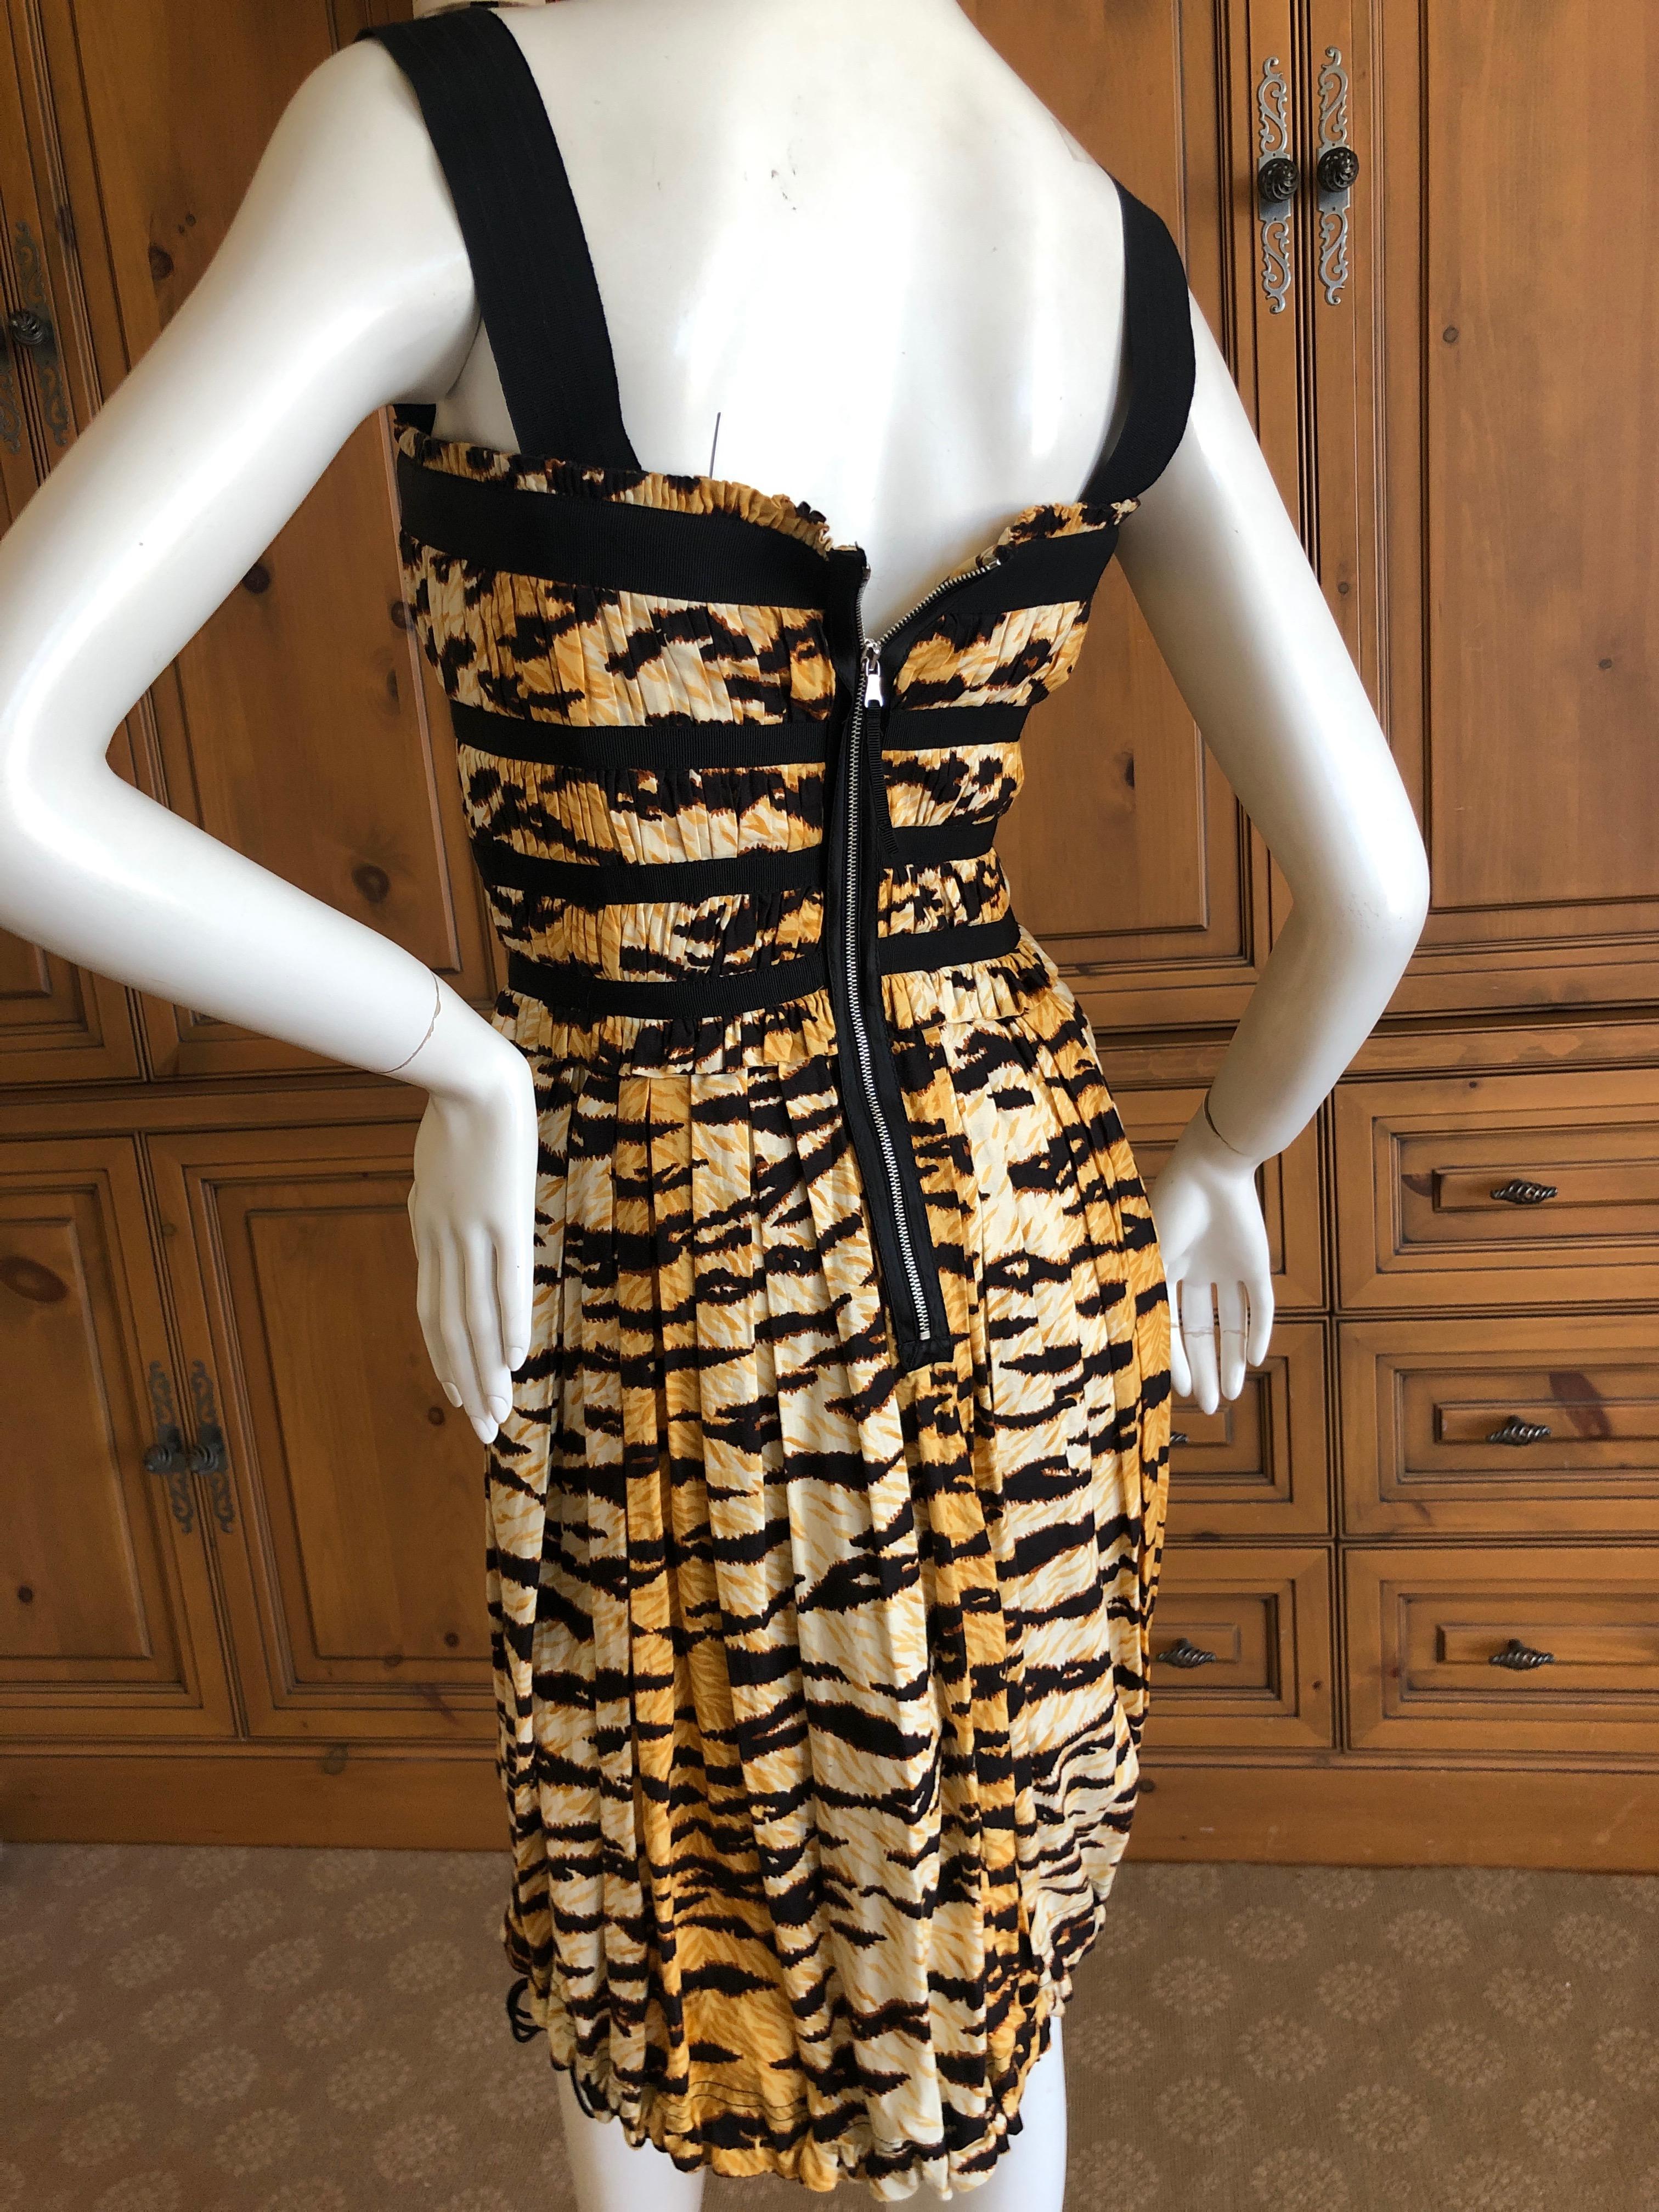 D&G Dolce & Gabbana Vintage Tiger Print Cotton Corset Dress In Excellent Condition For Sale In Cloverdale, CA